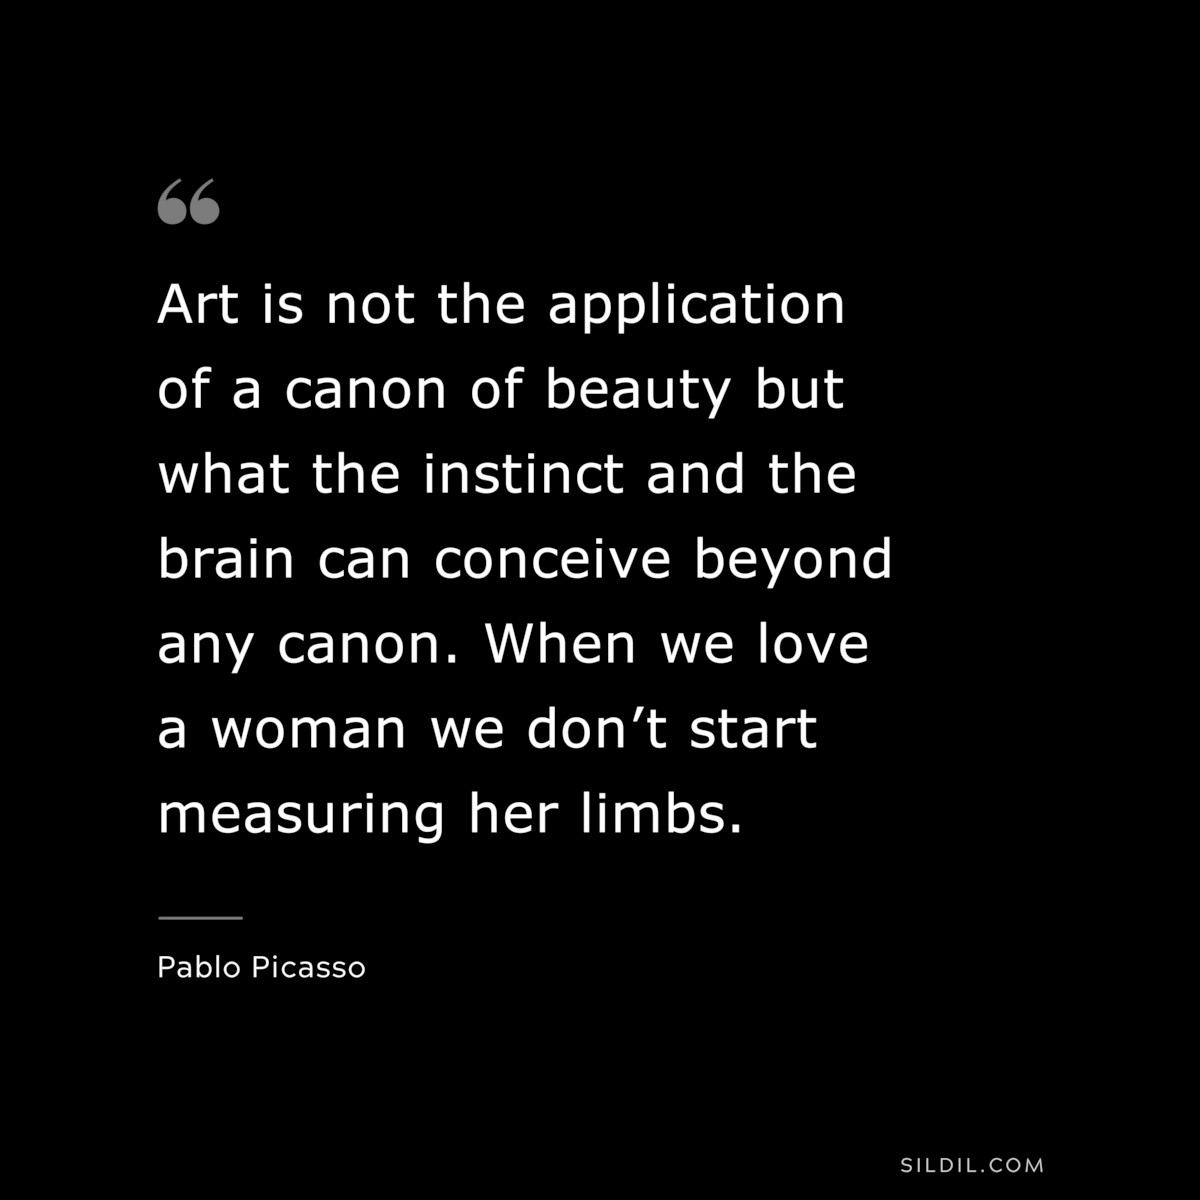 Art is not the application of a canon of beauty but what the instinct and the brain can conceive beyond any canon. When we love a woman we don’t start measuring her limbs. ― Pablo Picasso